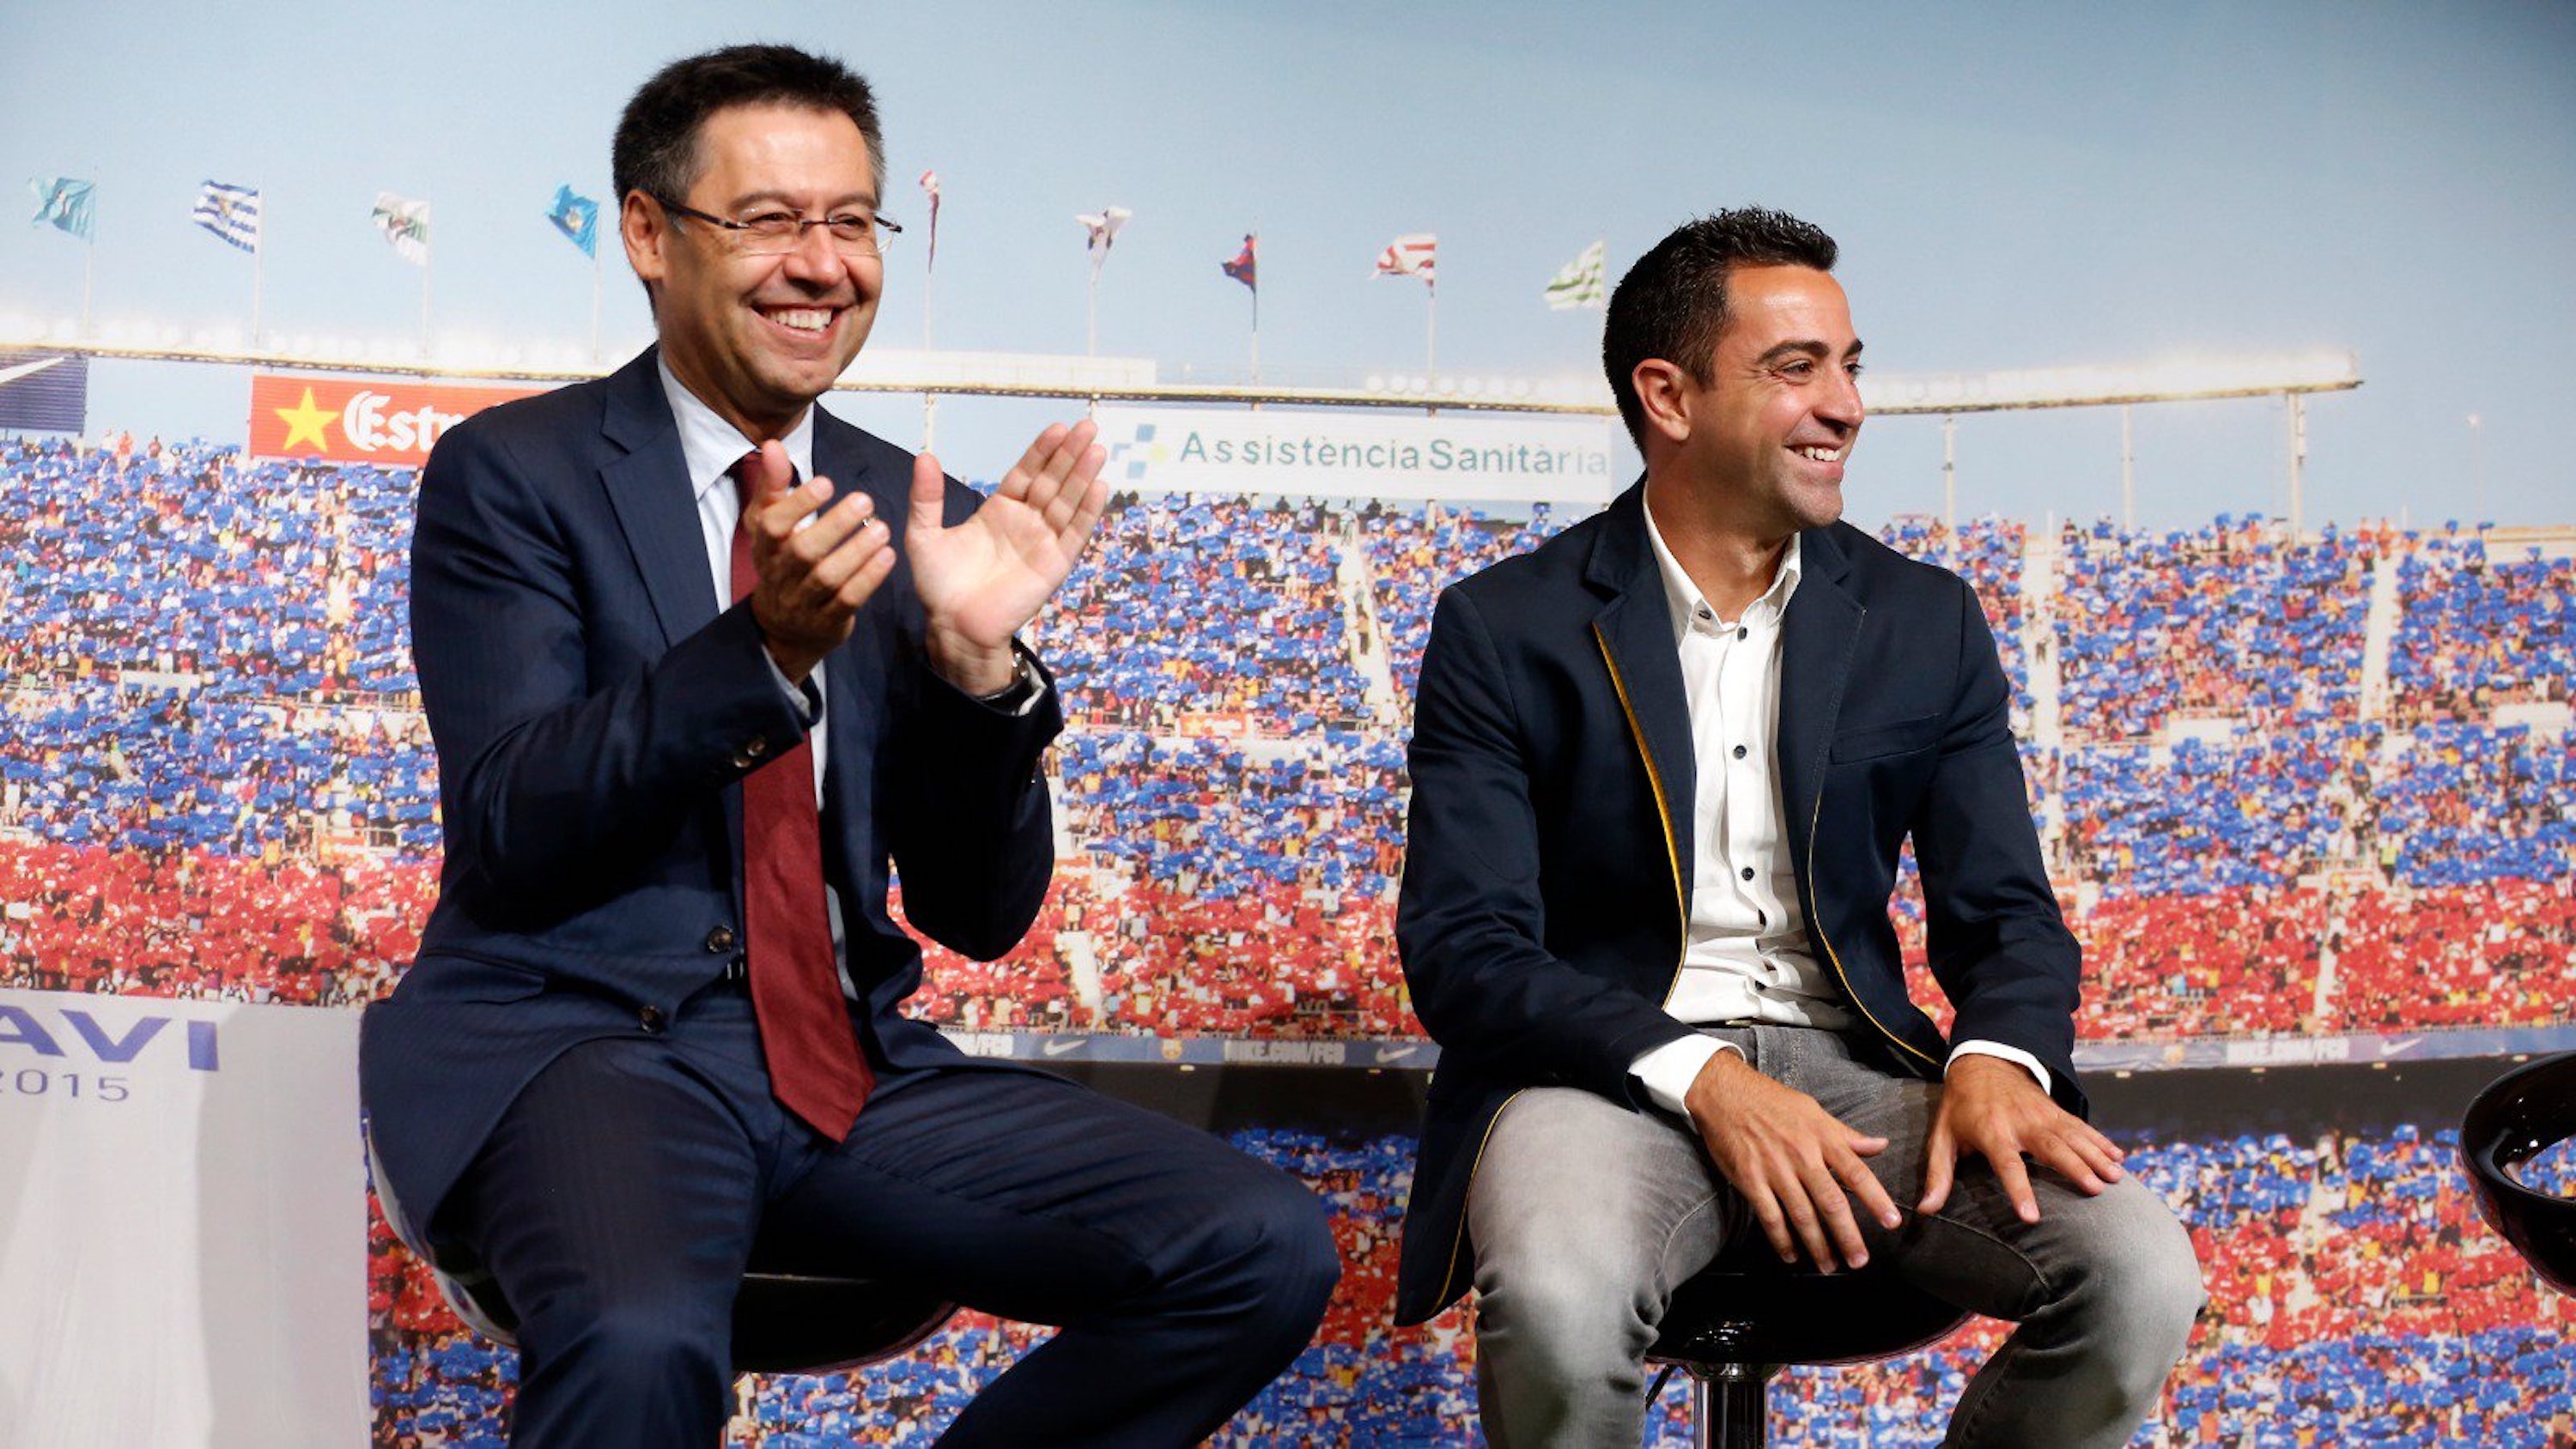 How Xavi responded to the Barça president's request after Bayern hammering